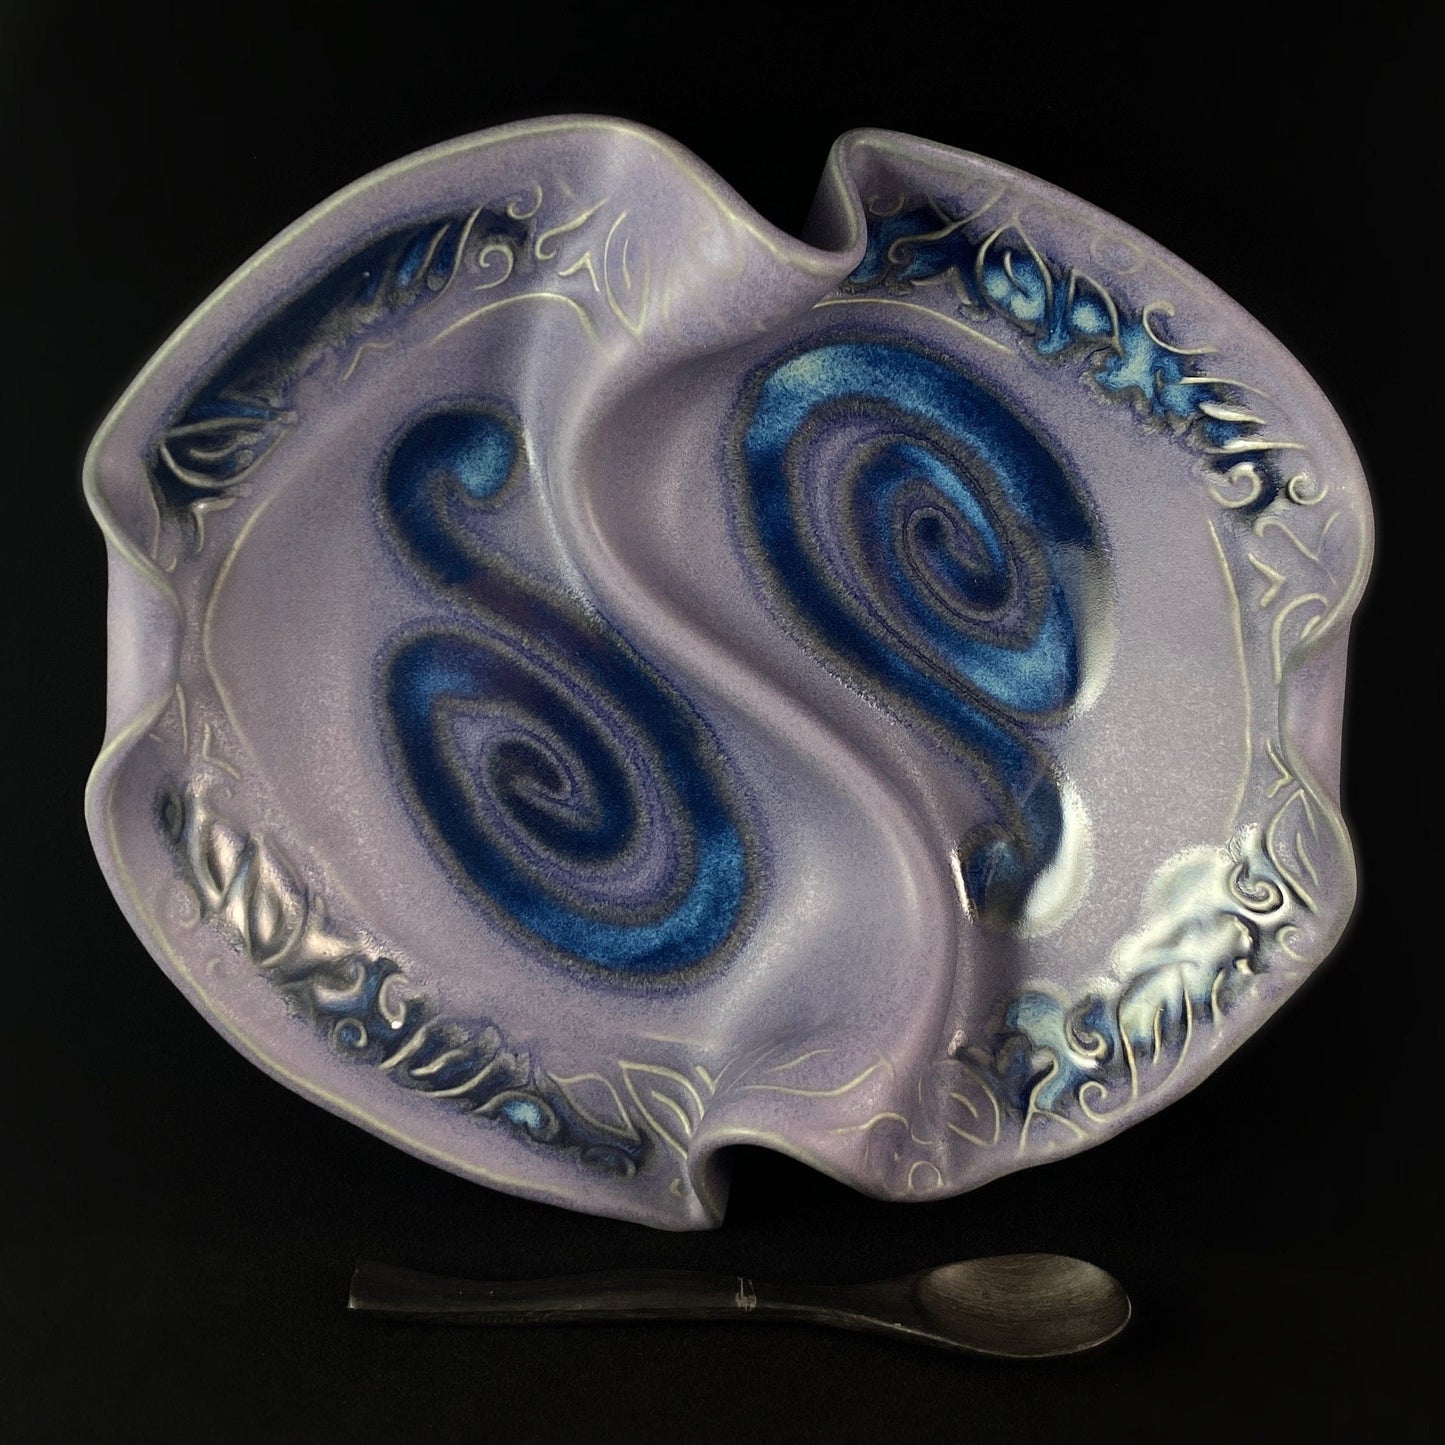 Handmade Purple and Blue Two Sided Condiment Dish with Spoon, Functional and Decorative Pottery